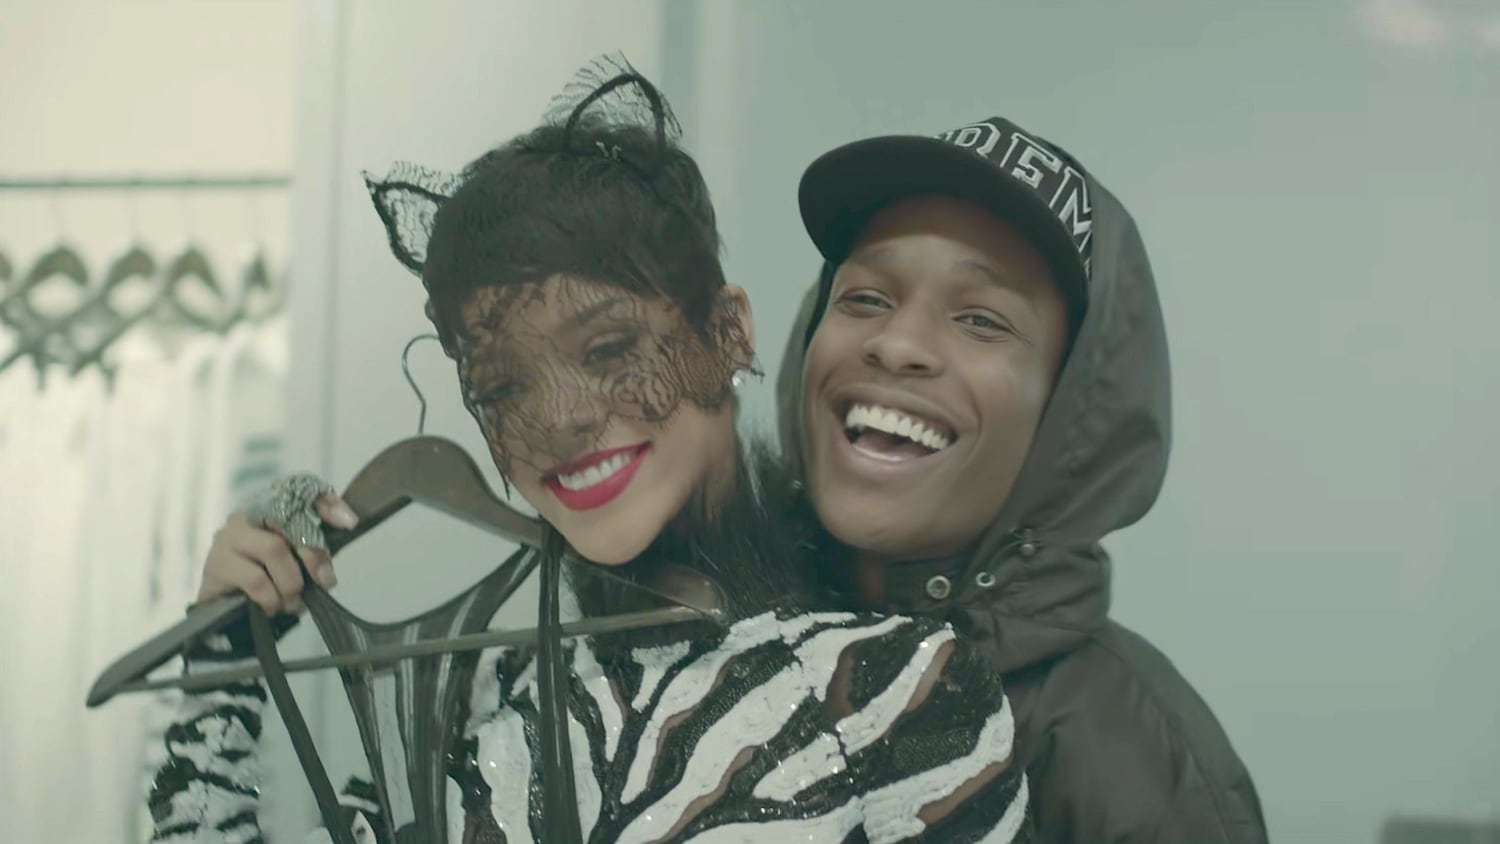 Rihanna And A$AP Rocky Hit With Breakup, Cheating Rumors